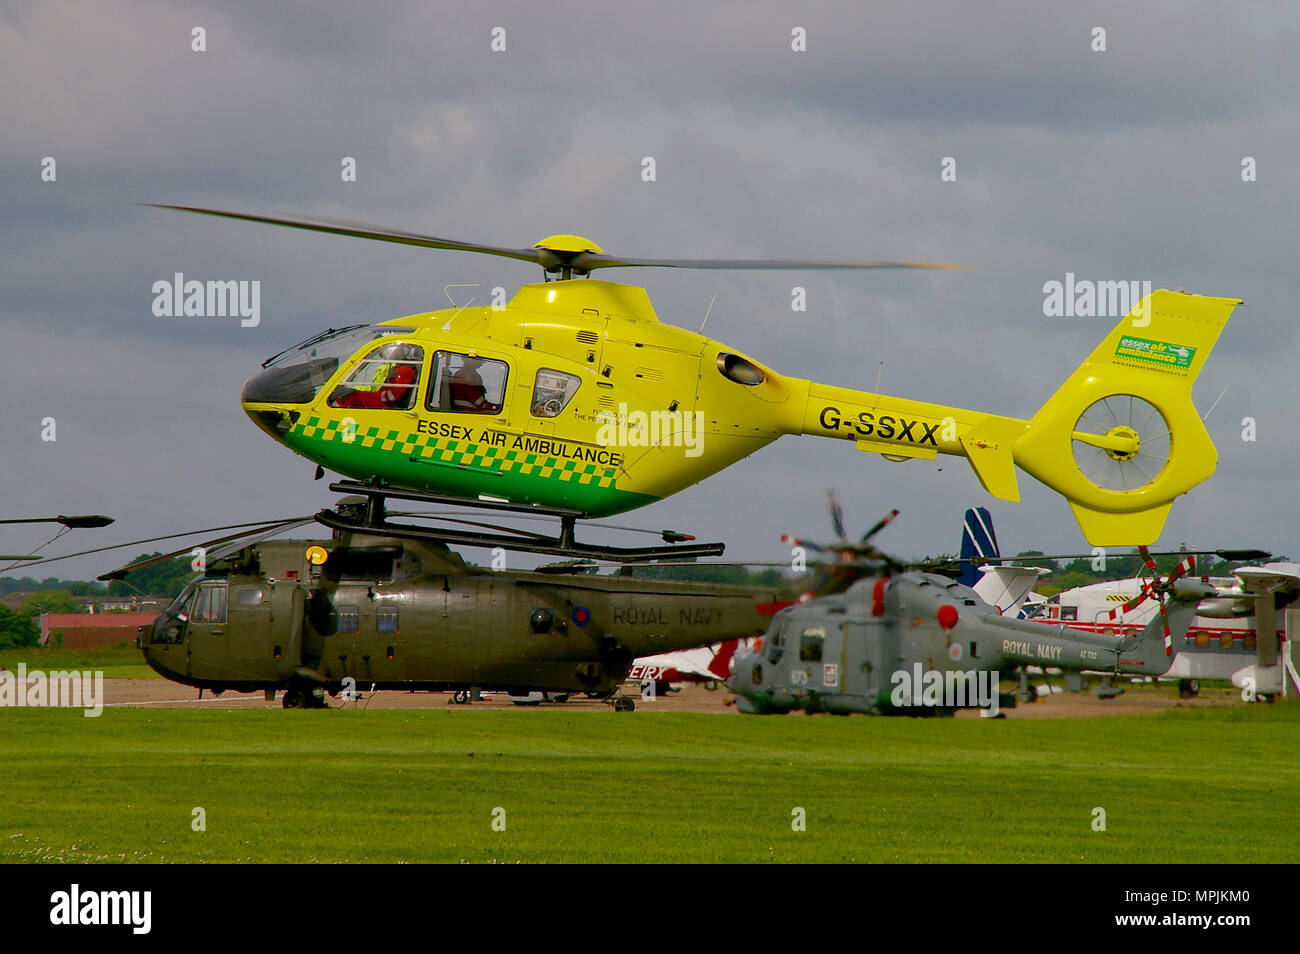 Essex Air Ambulance helicopter Eurocopter EC135 G-SSXX, landing at Southend airport during the airshow with Sea King and Lynx military helicopters Stock Photo